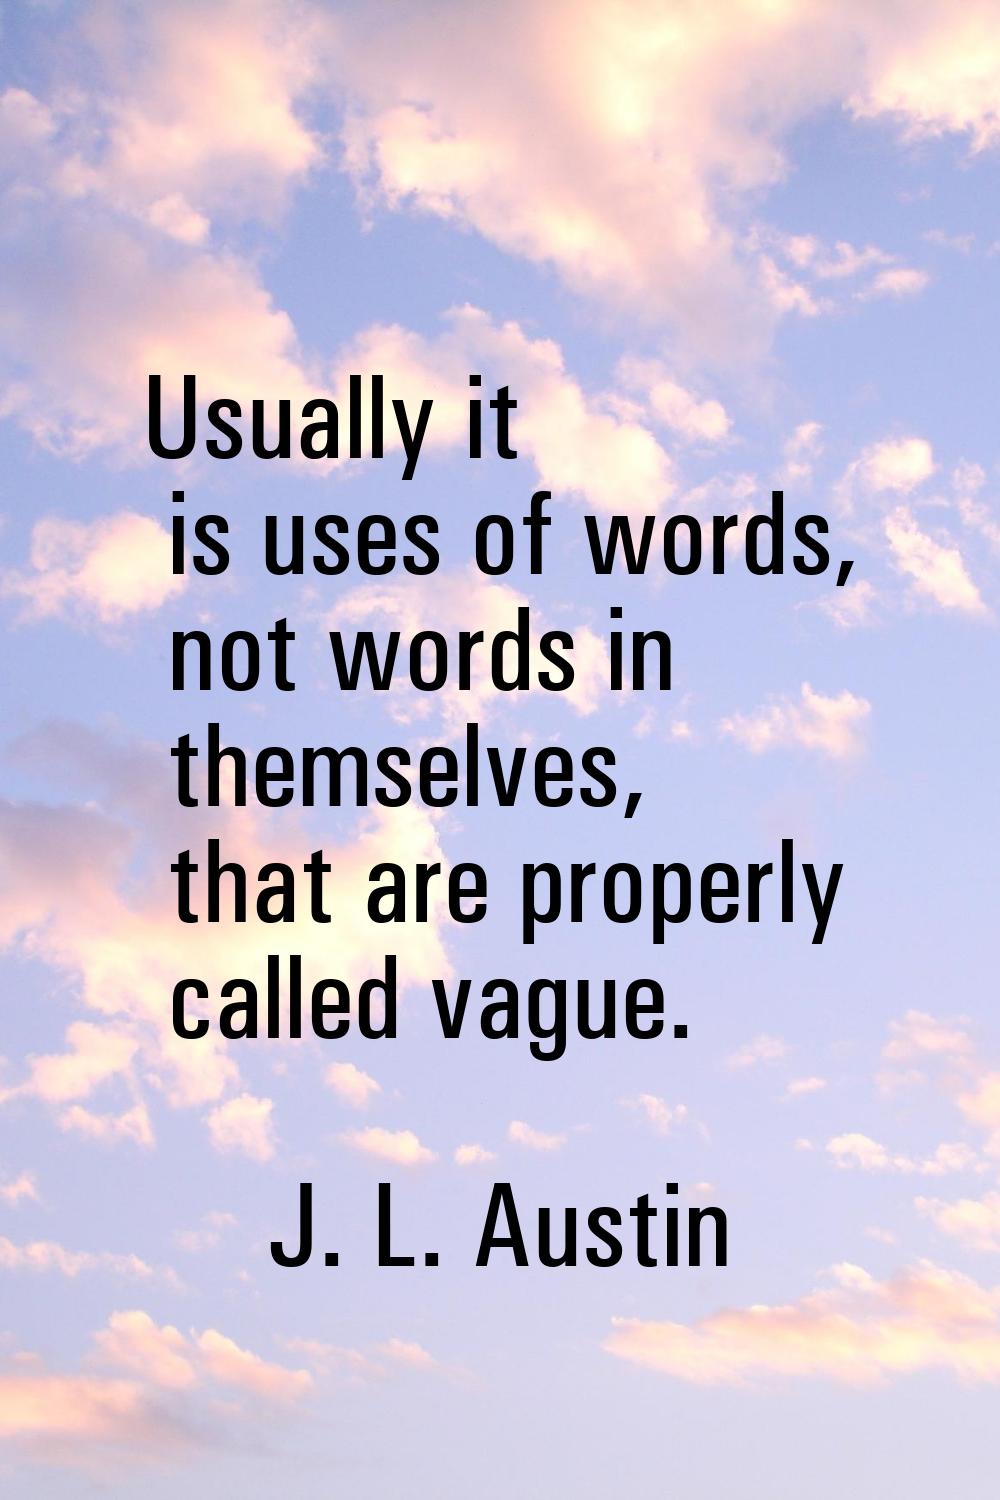 Usually it is uses of words, not words in themselves, that are properly called vague.